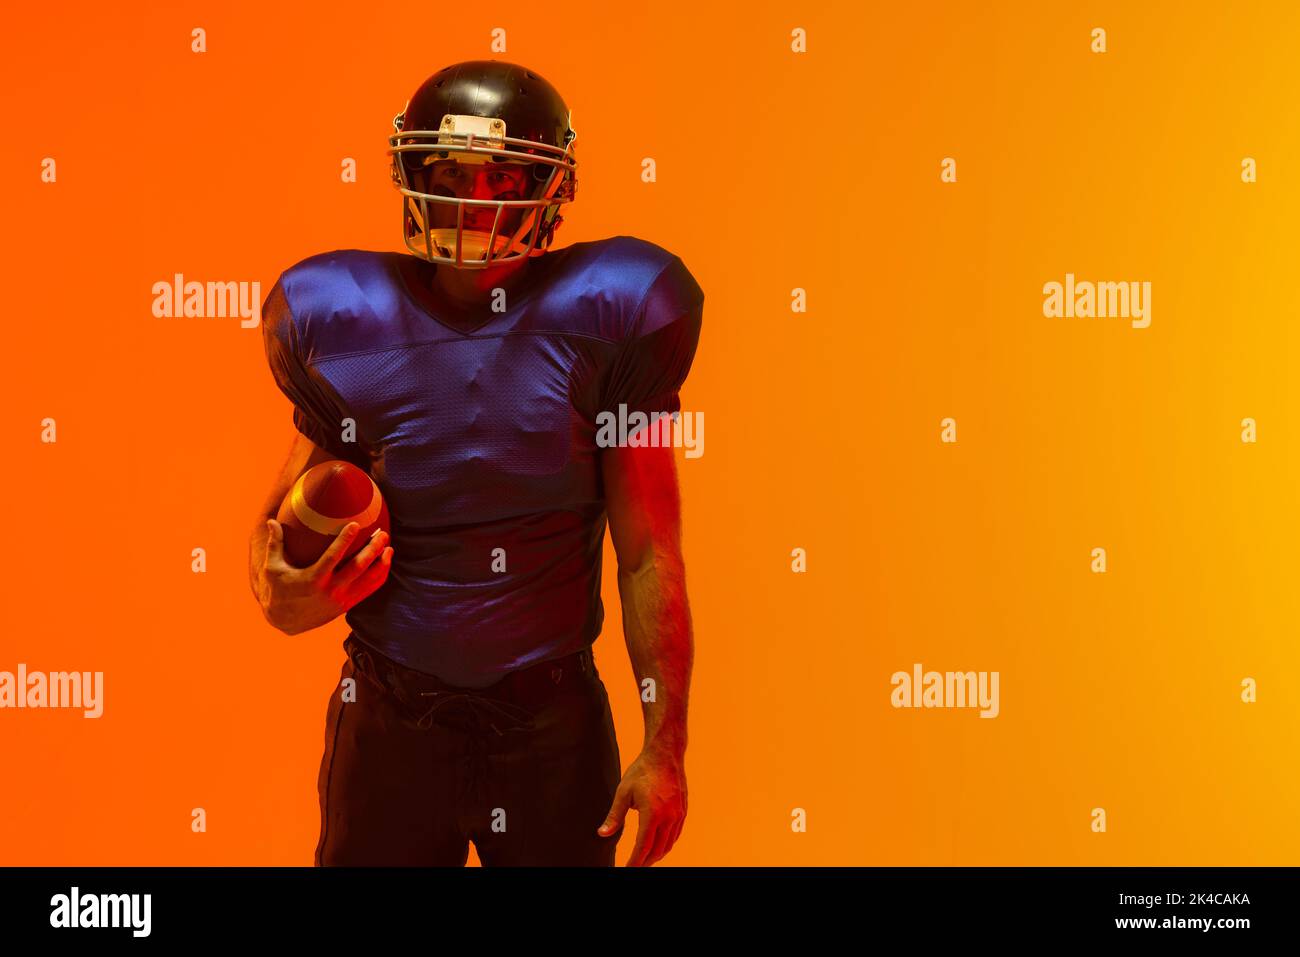 Caucasian male american football player holding ball with neon orange lighting. Sport, movement, training and active lifestyle concept. Stock Photo